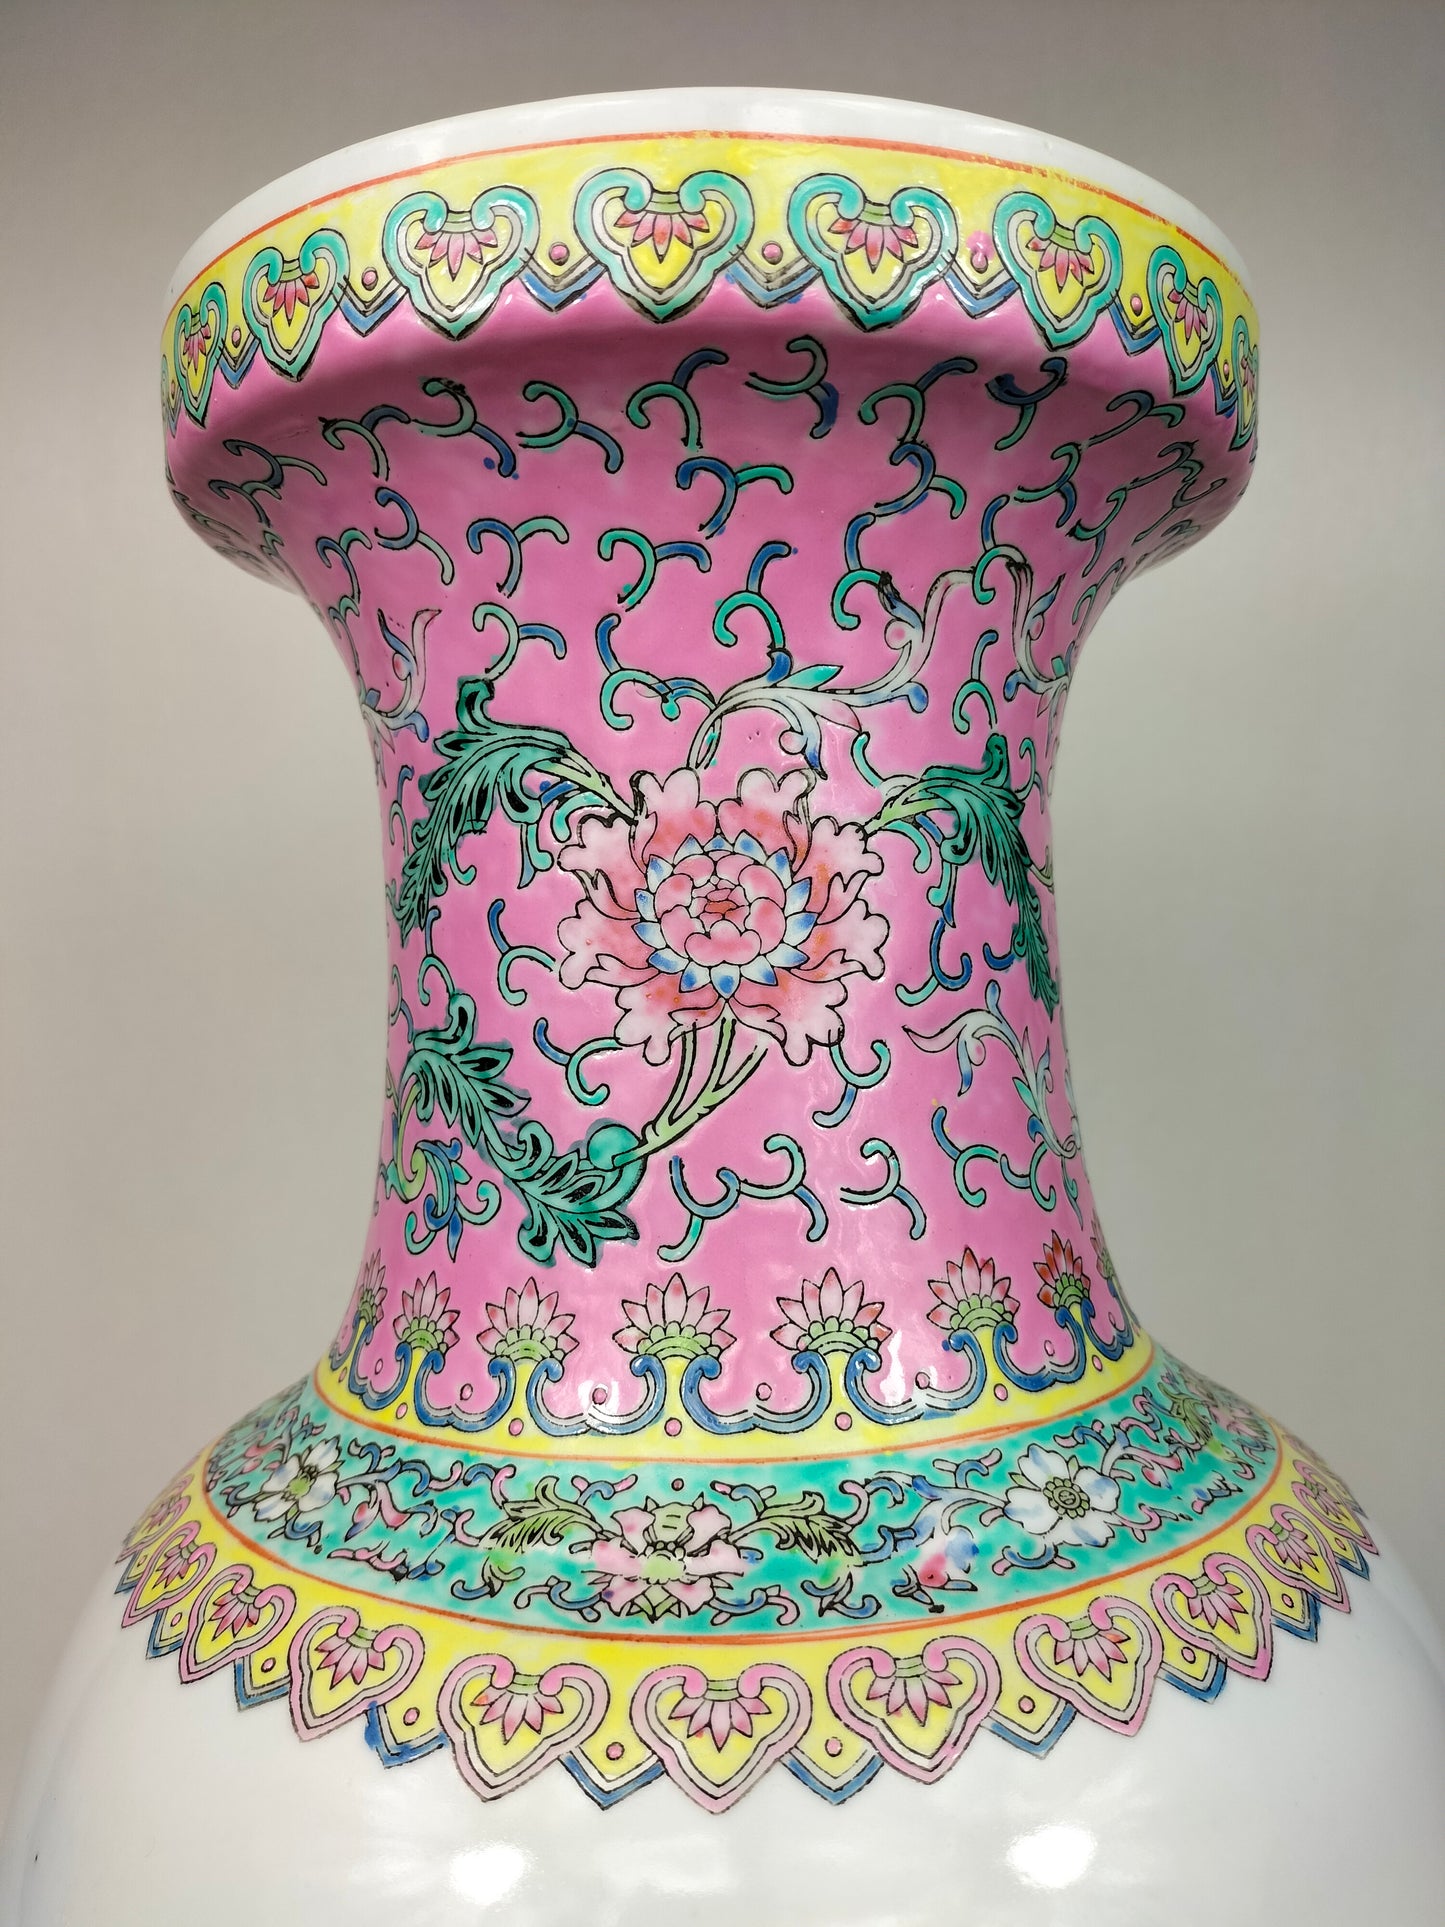 Large Chinese famille rose vase decorated with 8 immortals // Jingdezhen - 20th century